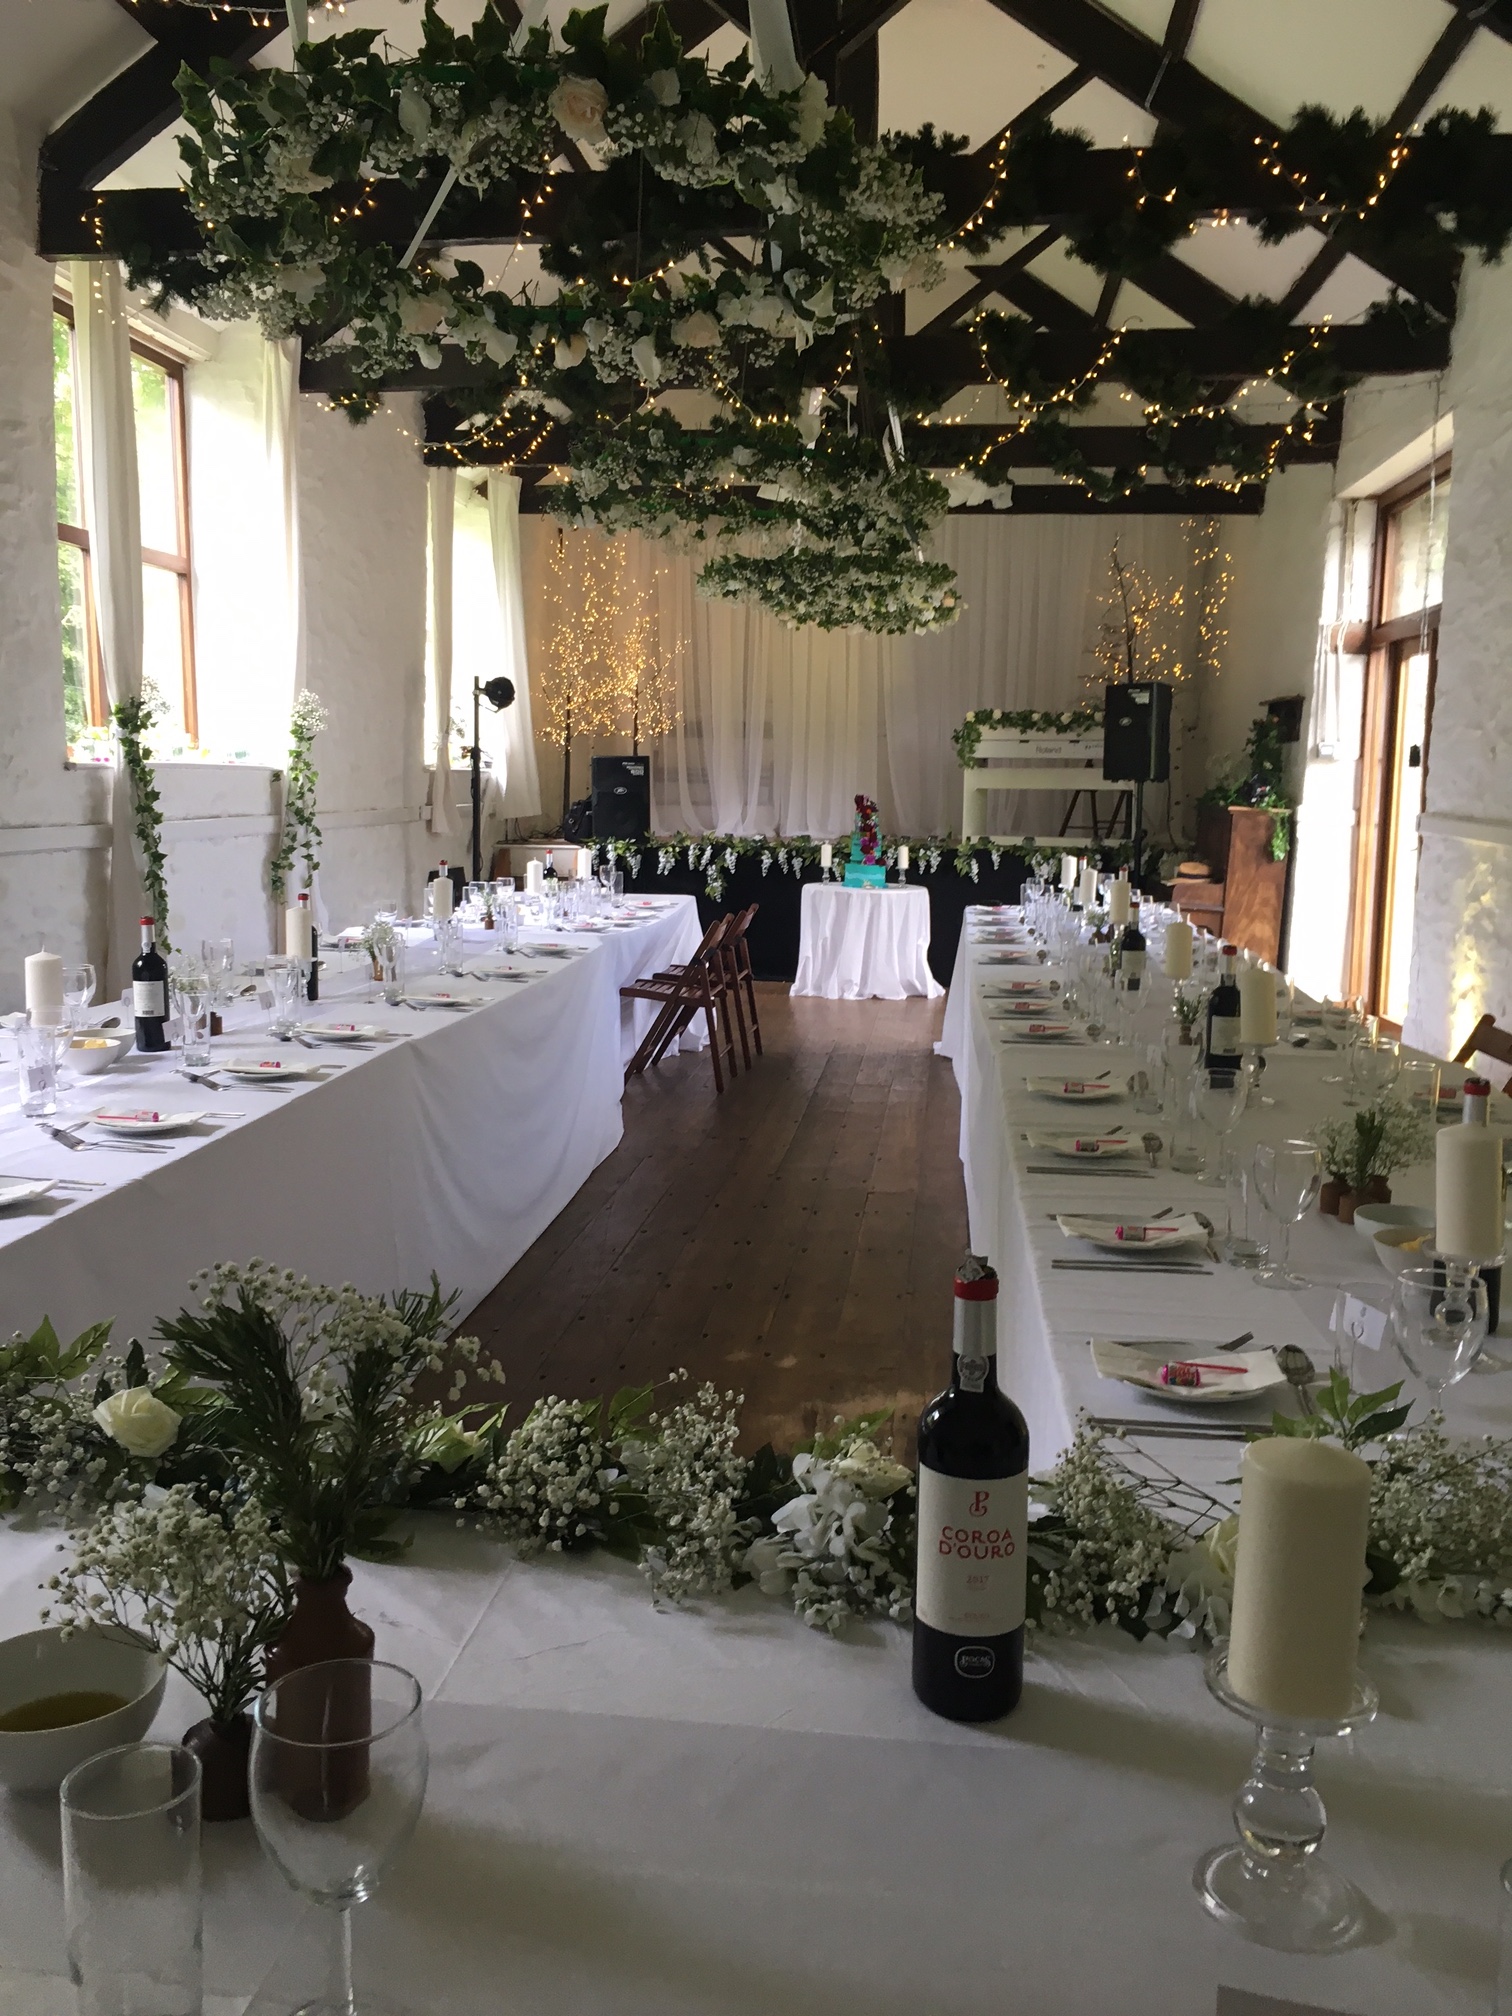 Old Rectory, Pyworthy - the village hall set up for a wedding reception